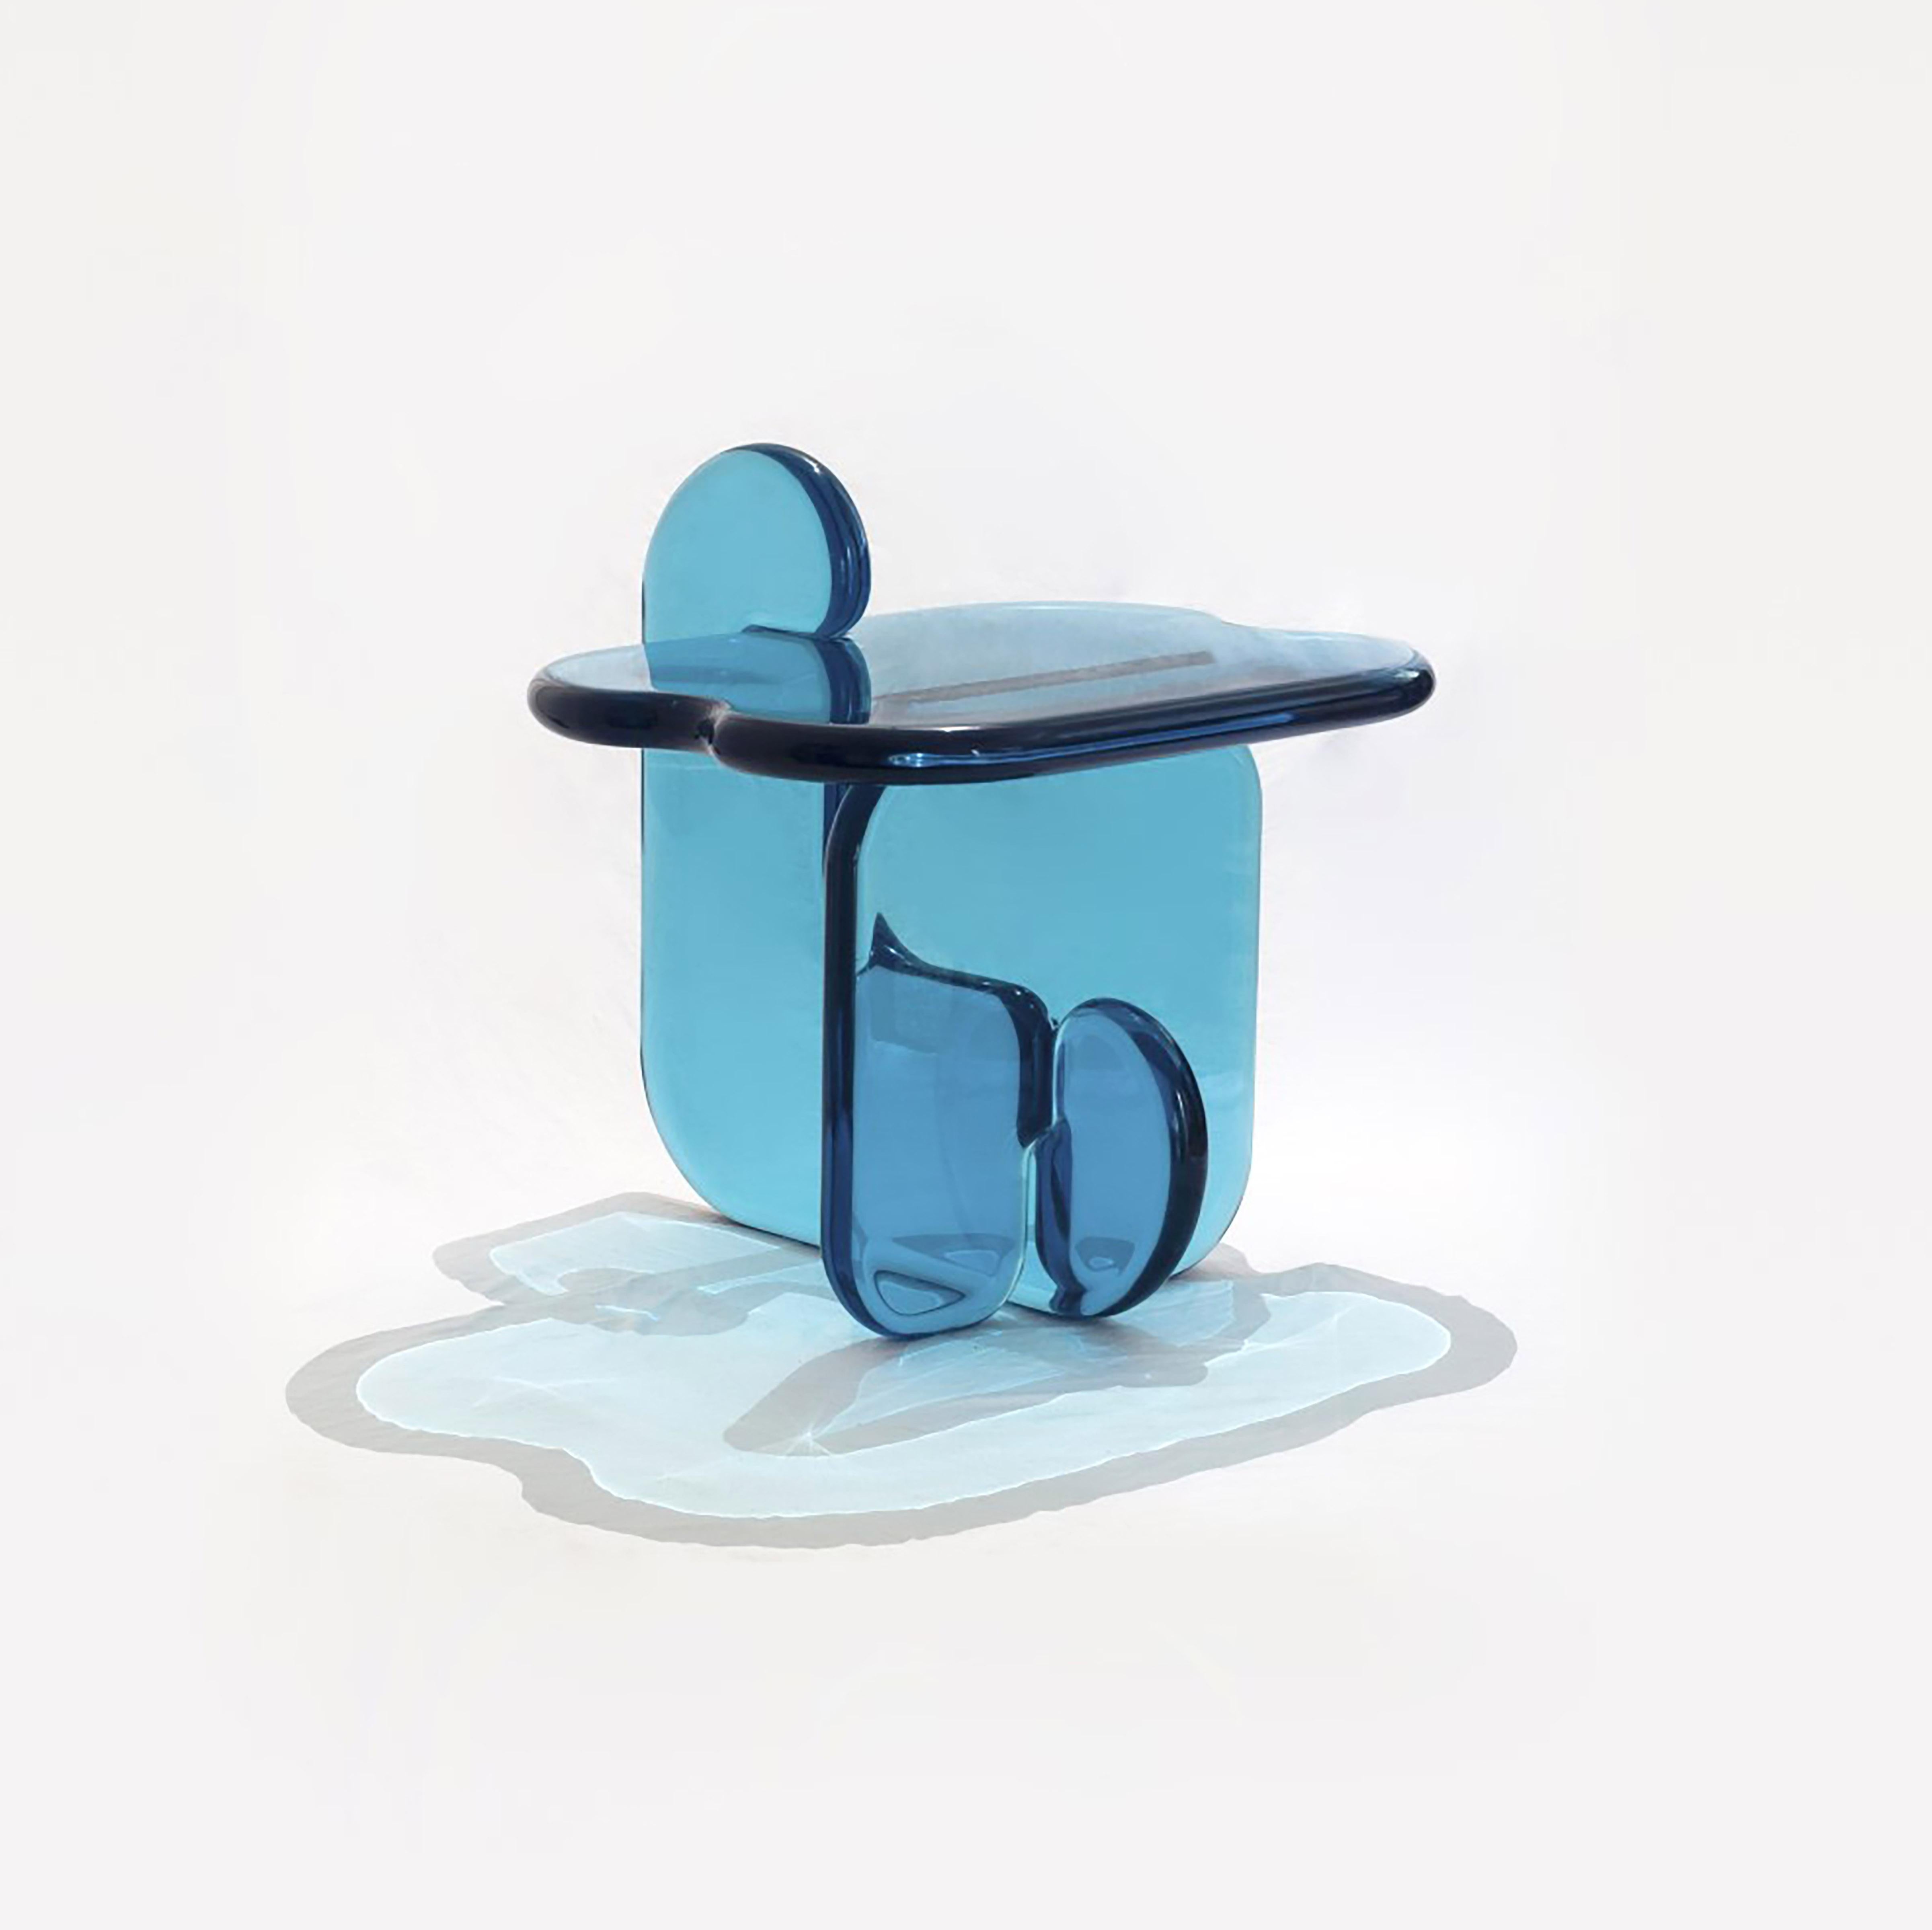 This side table is a continuation of the Plump series of sculptural furniture. This transparent table is a contemporary and modern addition to any space. The shapes play upon the effect that resin has as light is refracted through the solid parts.